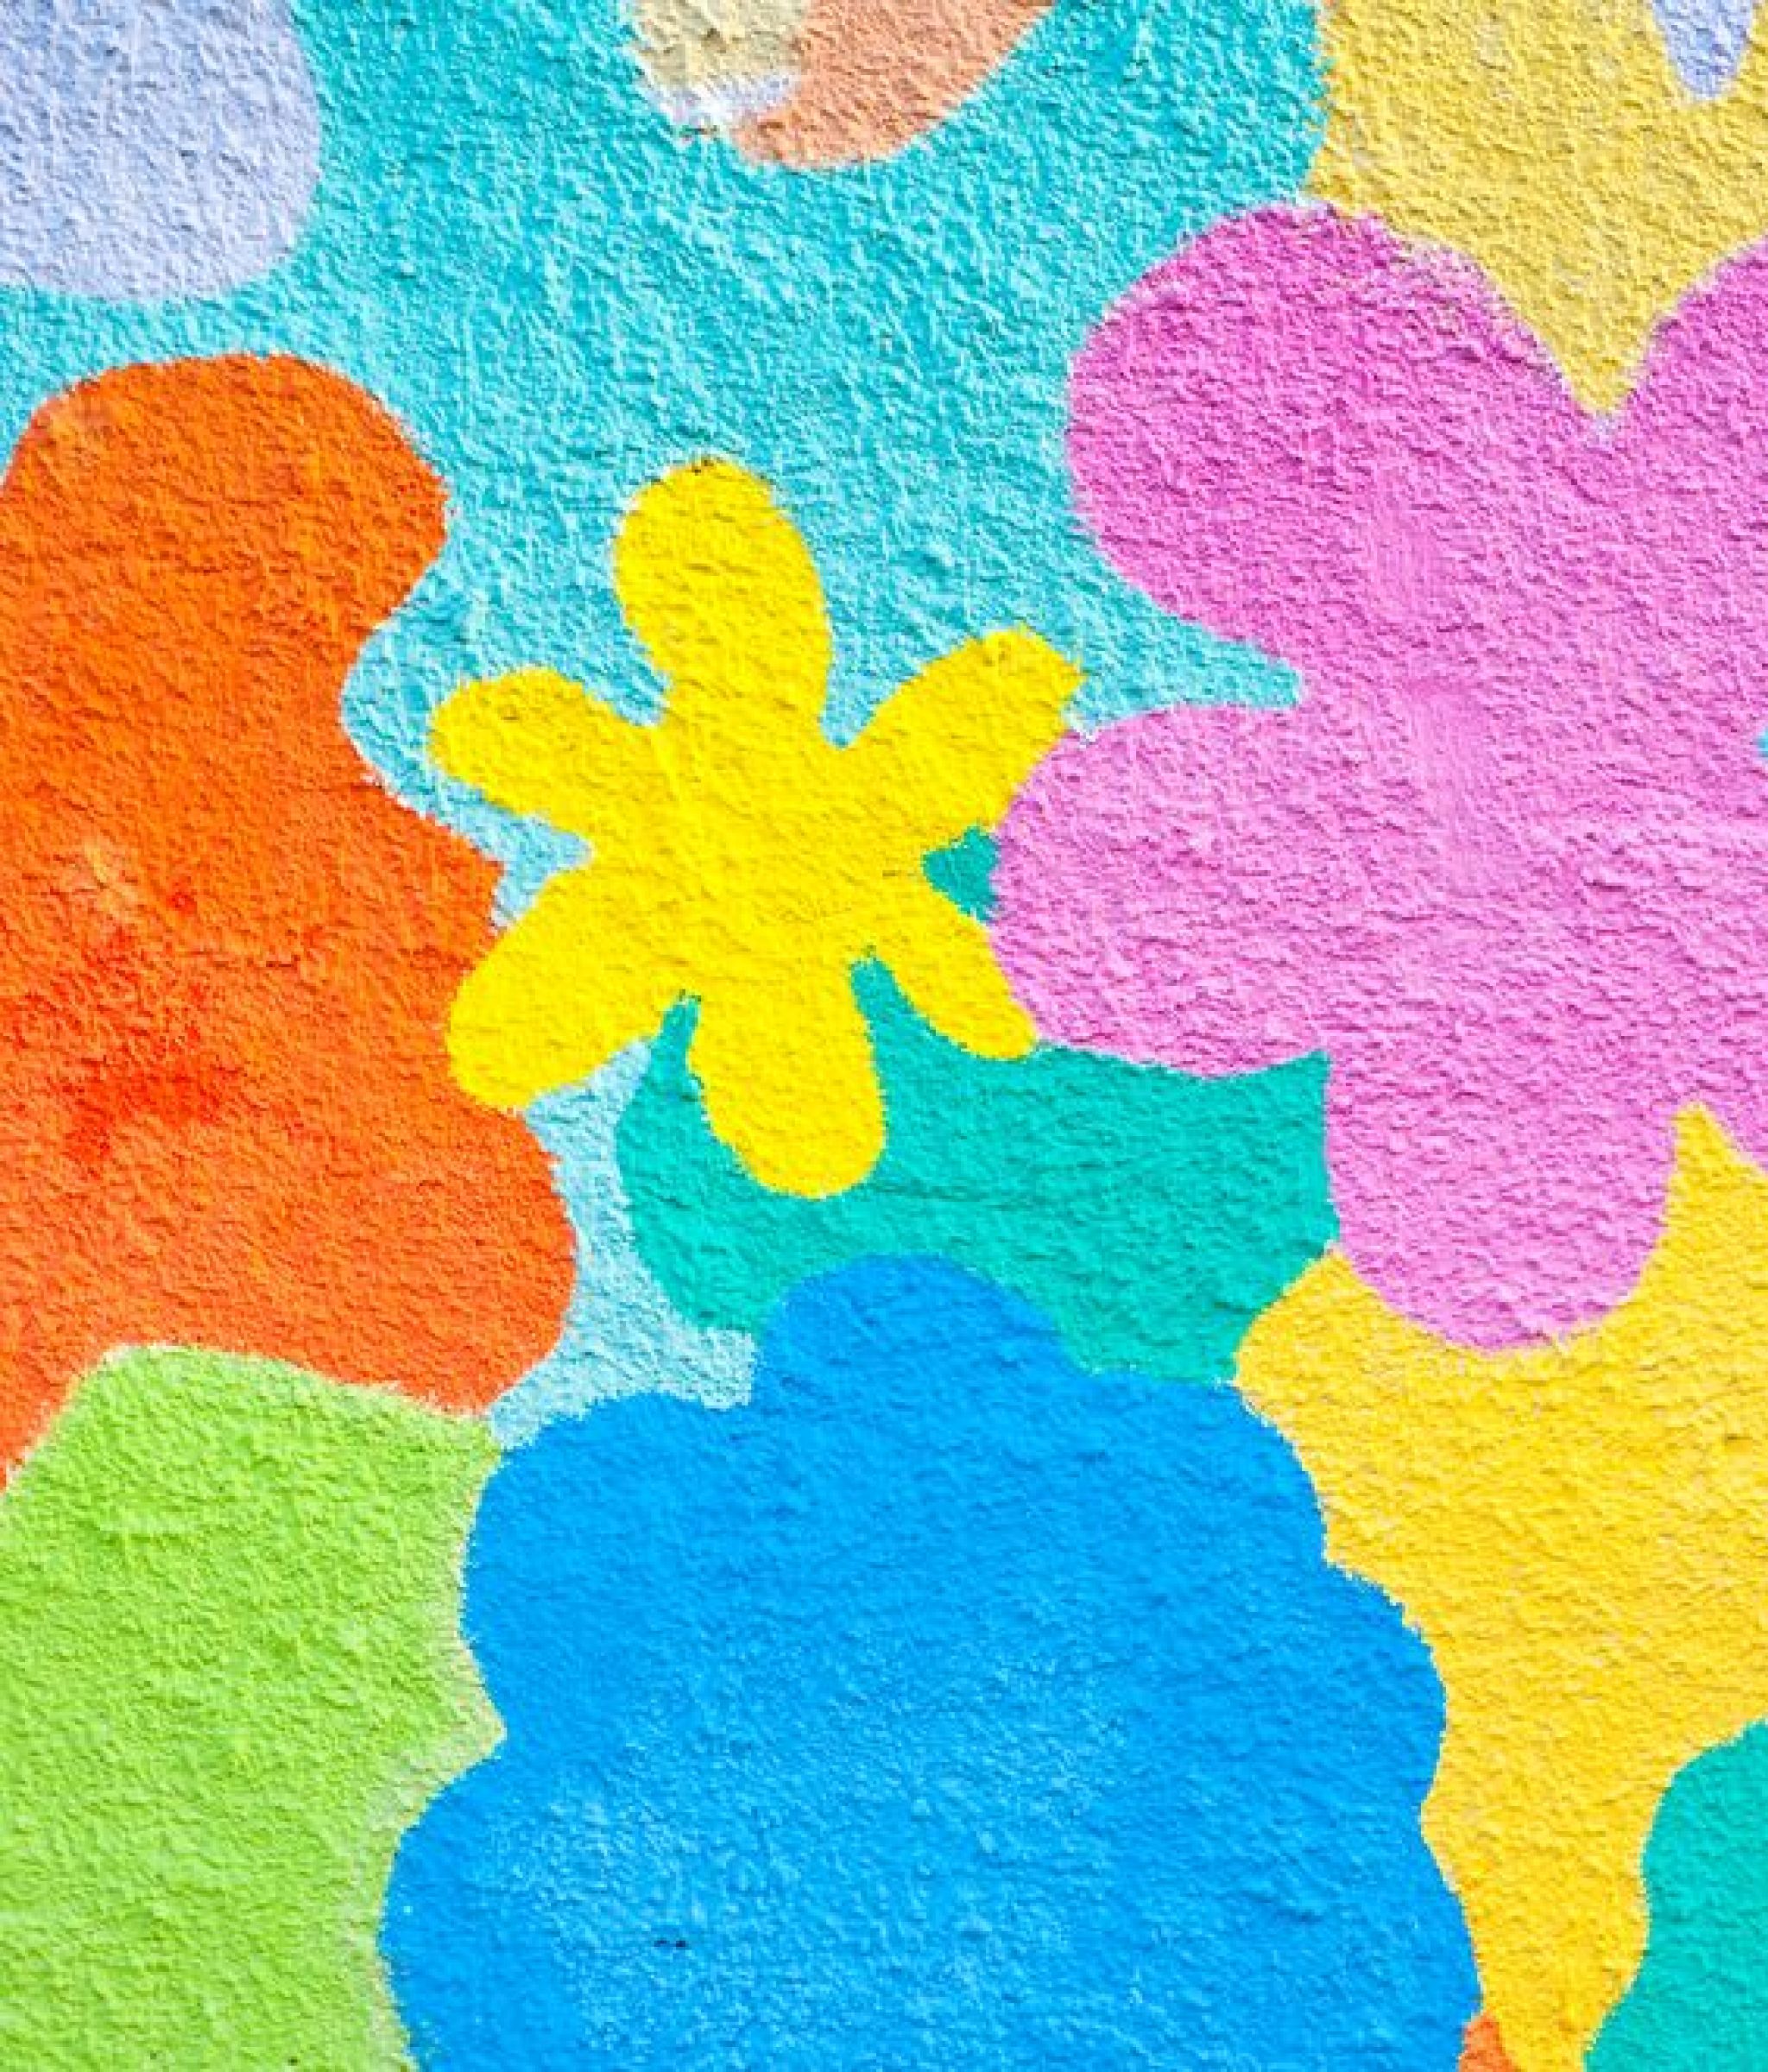 Colorful mural floral pattern painted on stucco